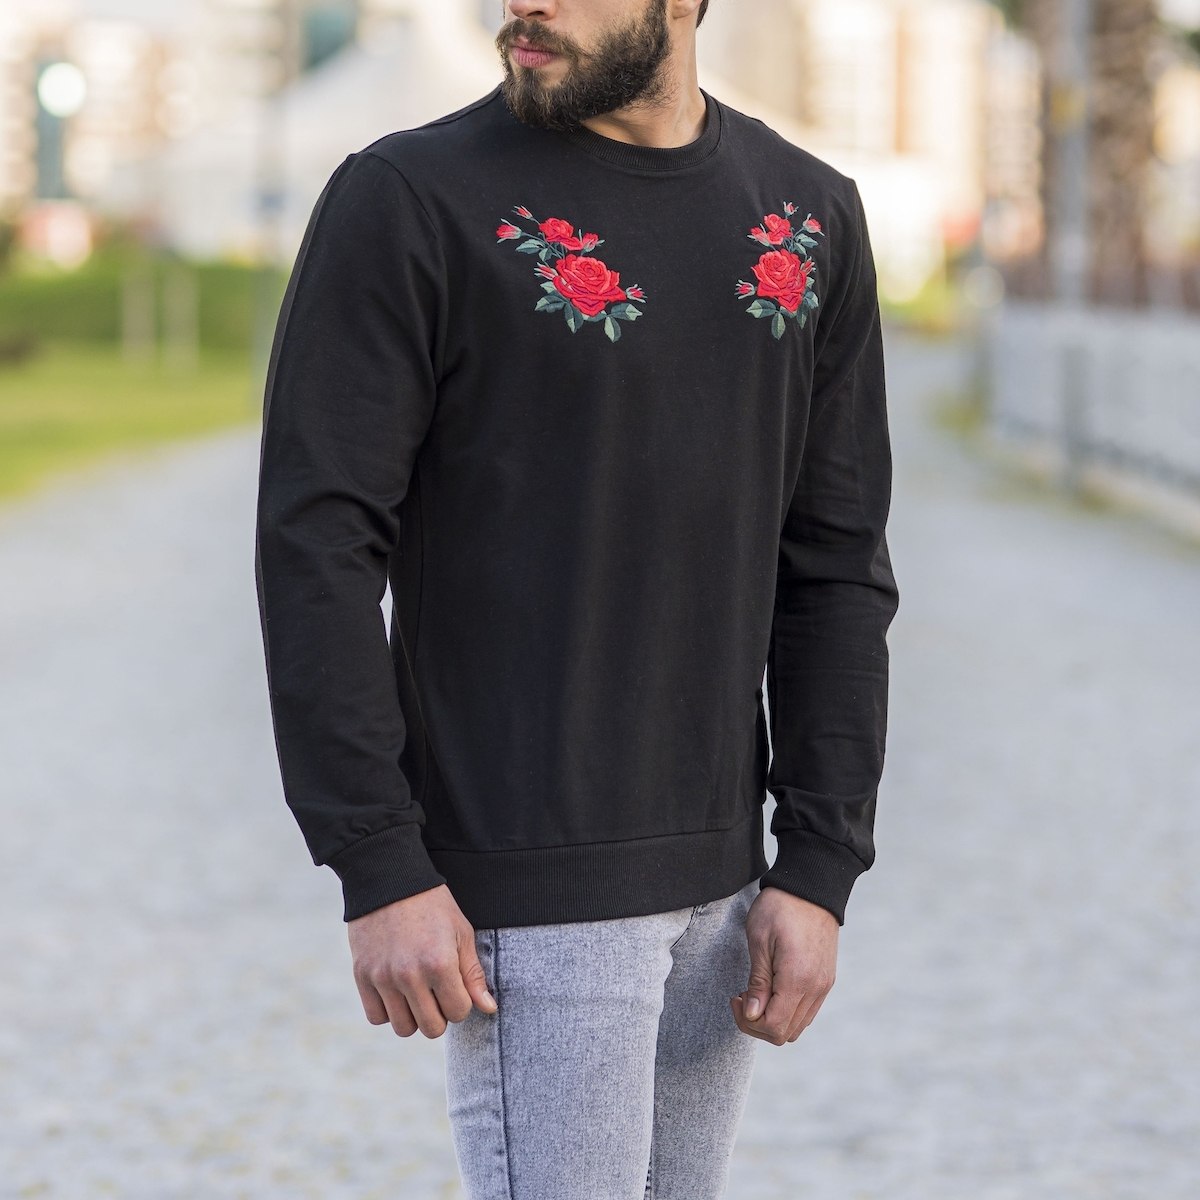 Black Sweatshirt With Rose Details On Arms